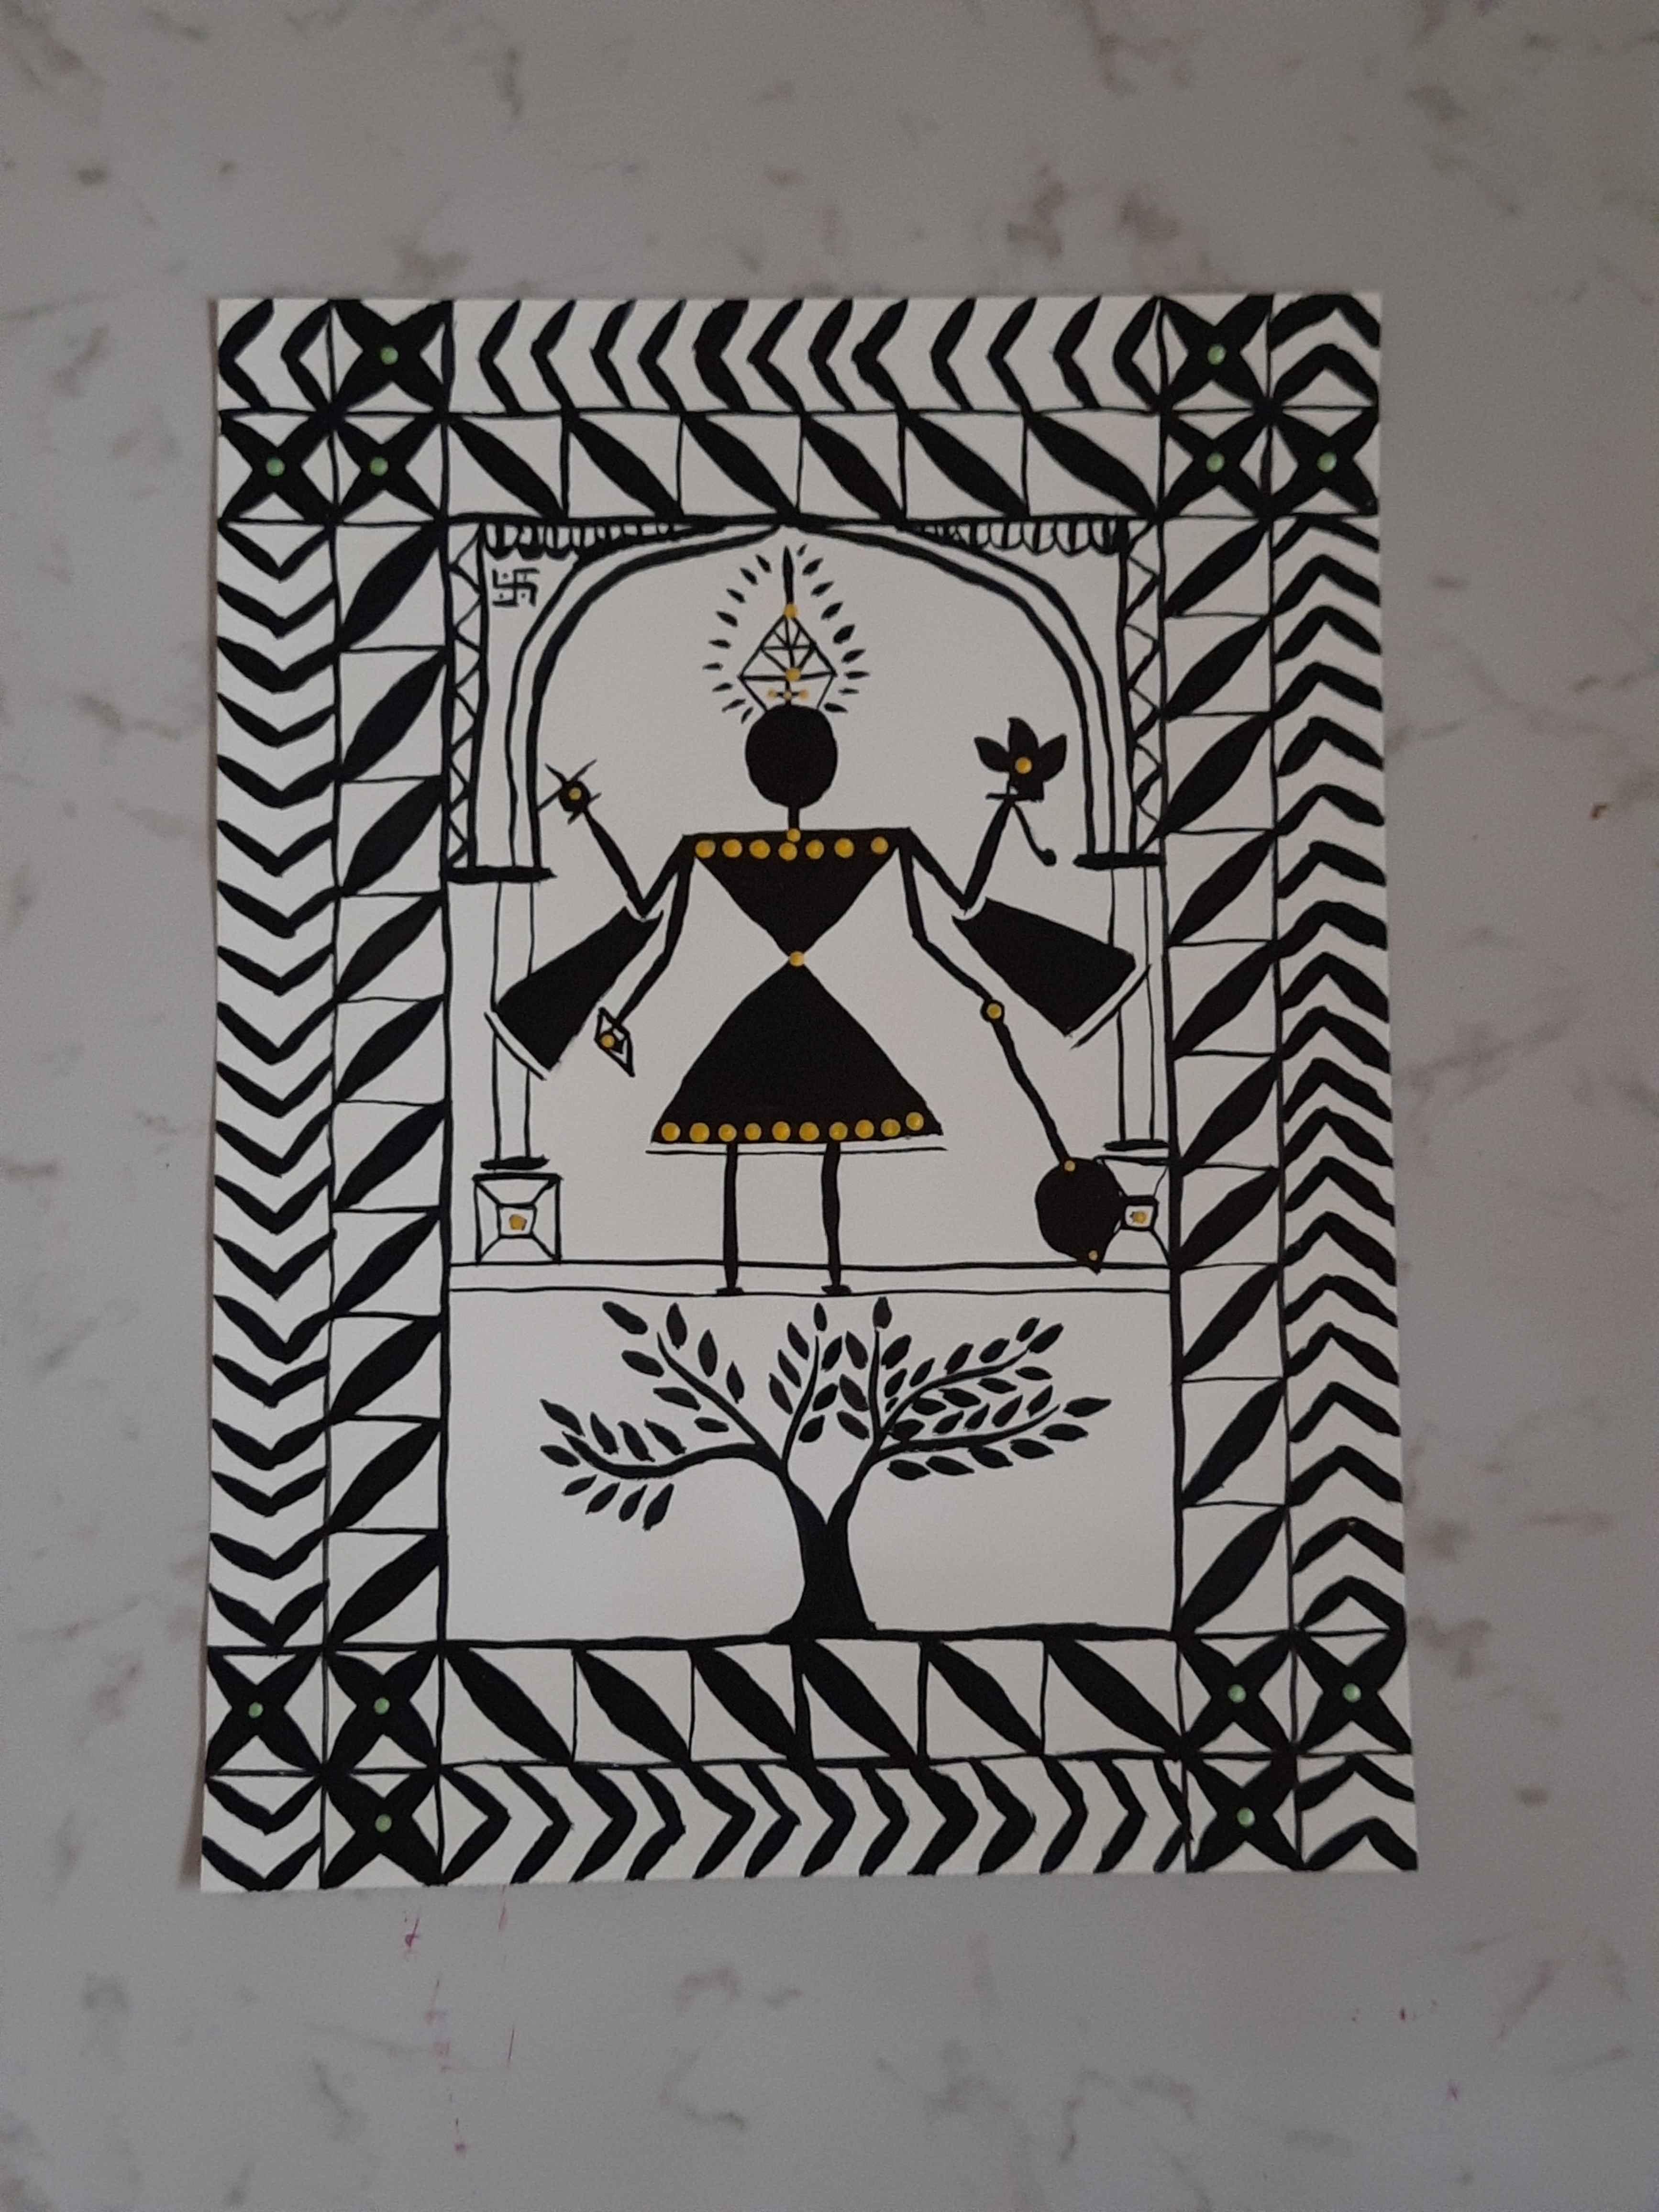 How to Draw Warli Art Hut Step by Step in Just 5 minutes! - YouTube